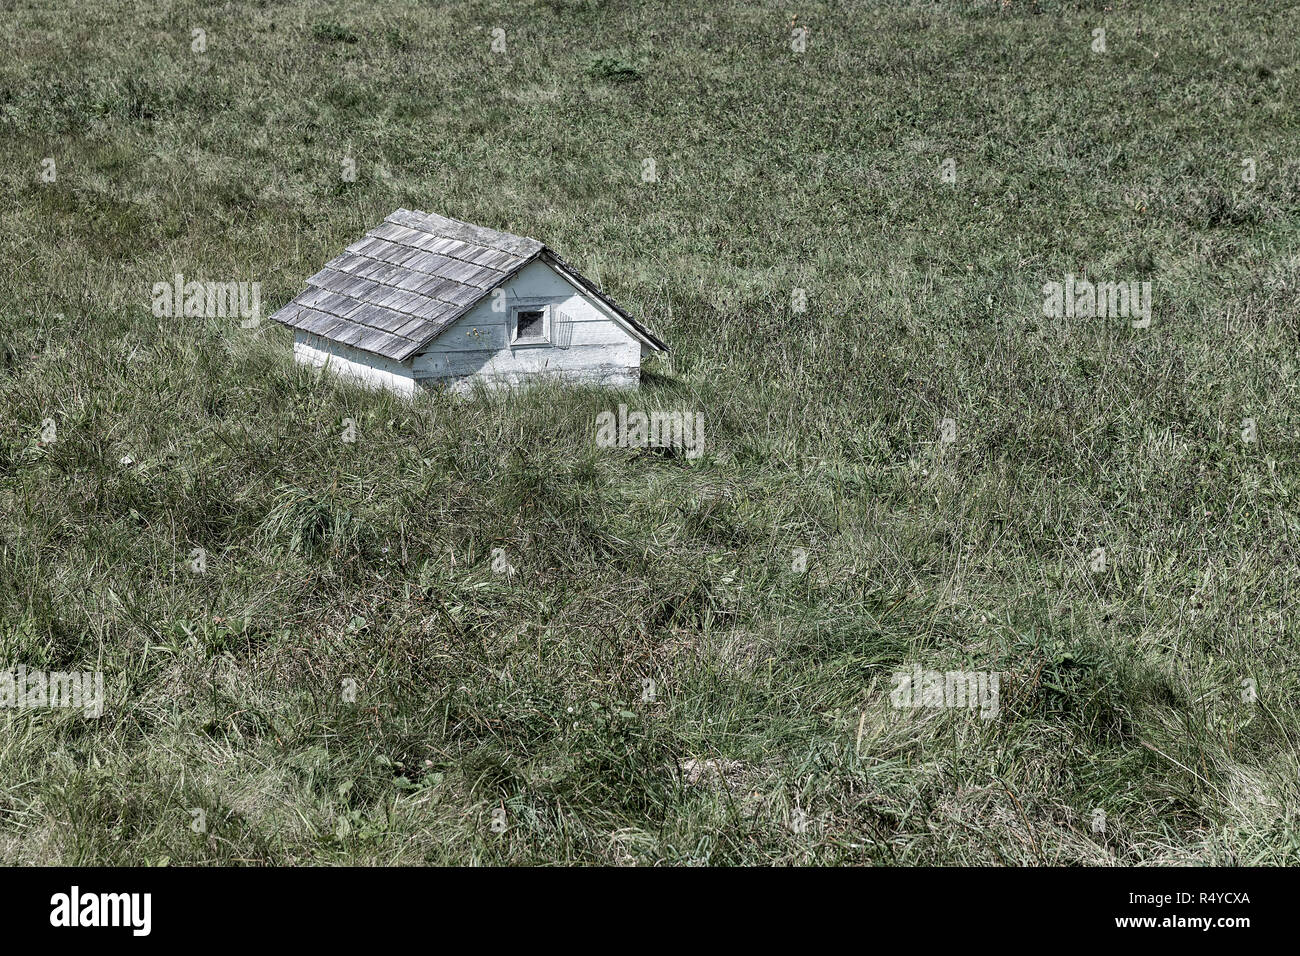 Small shelter in a farm field. Stock Photo